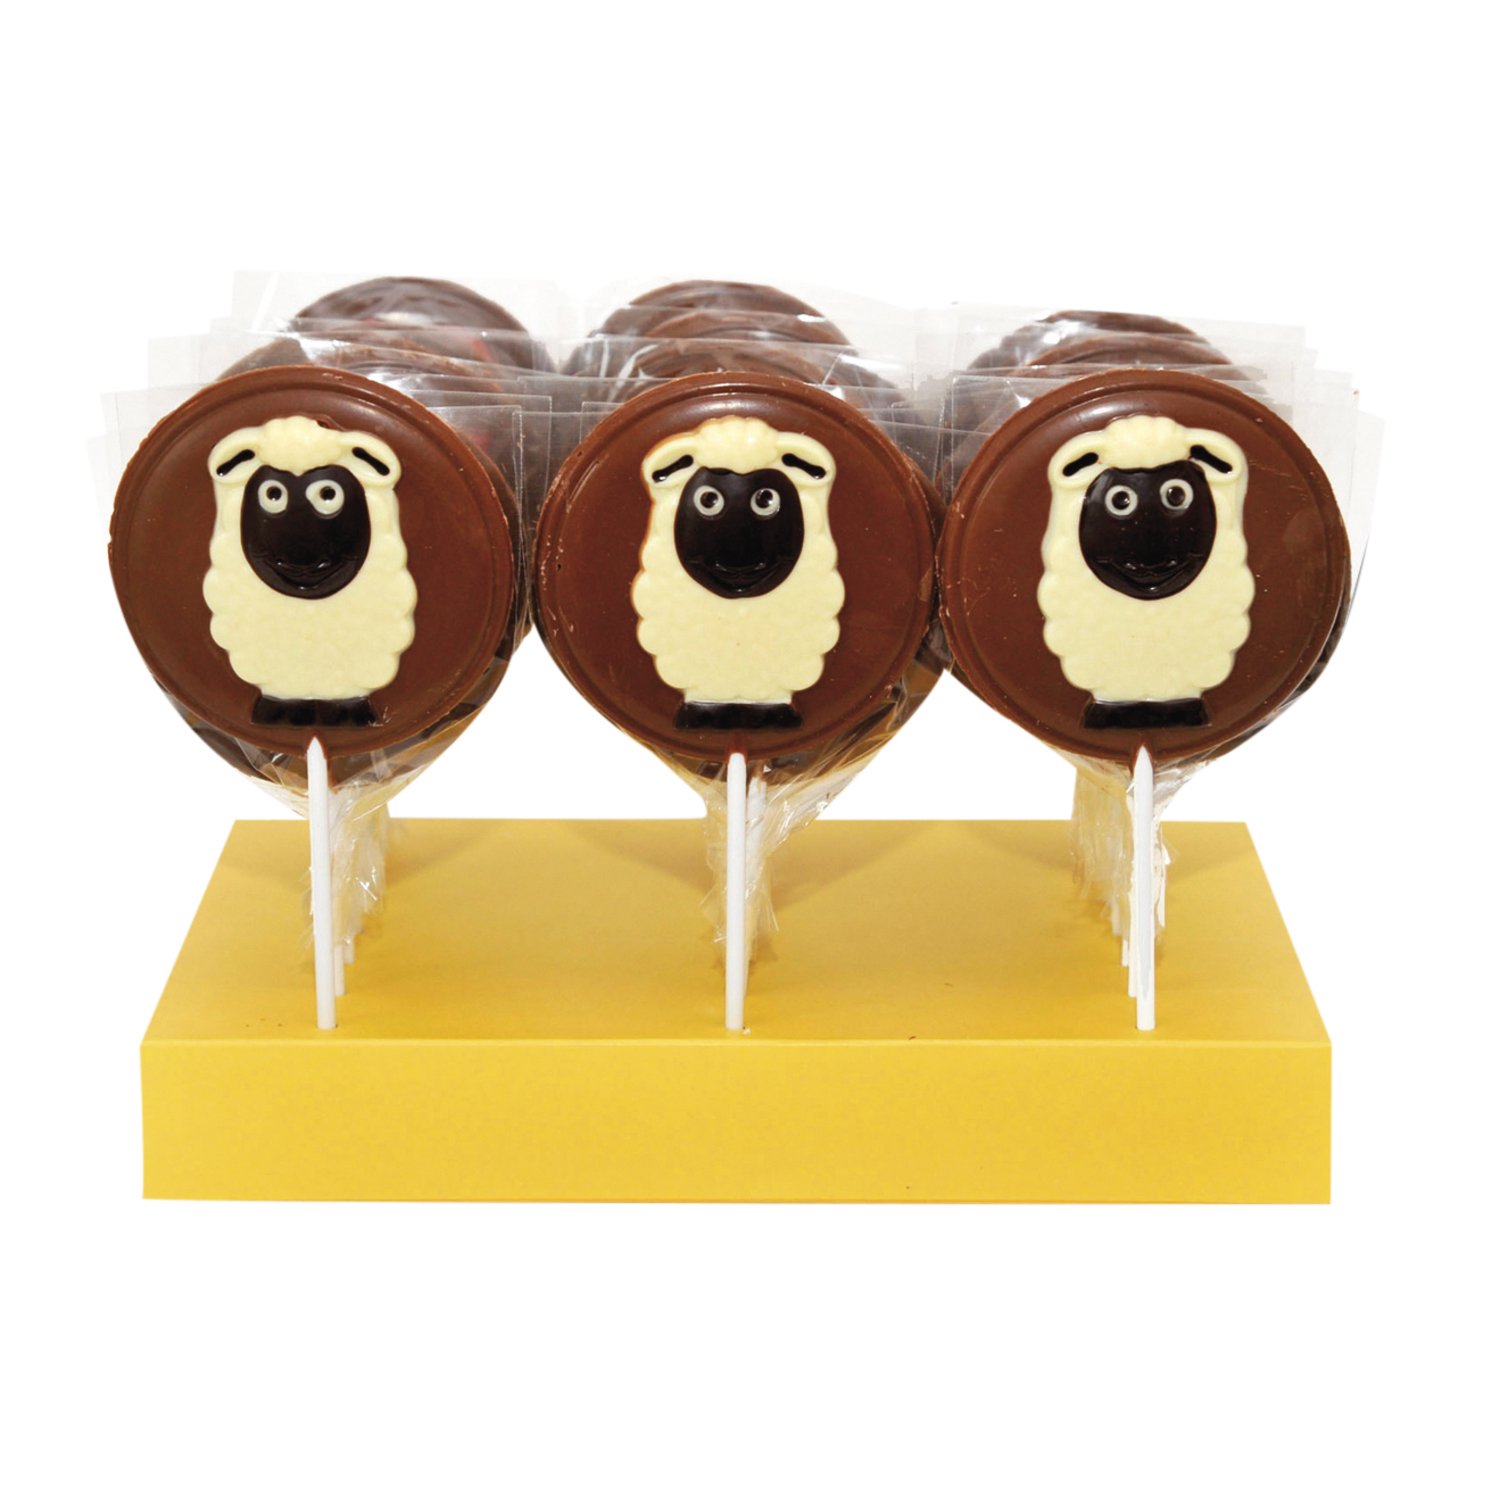 Easter sheep hand decorated milk choc lollies in display - 24x55g